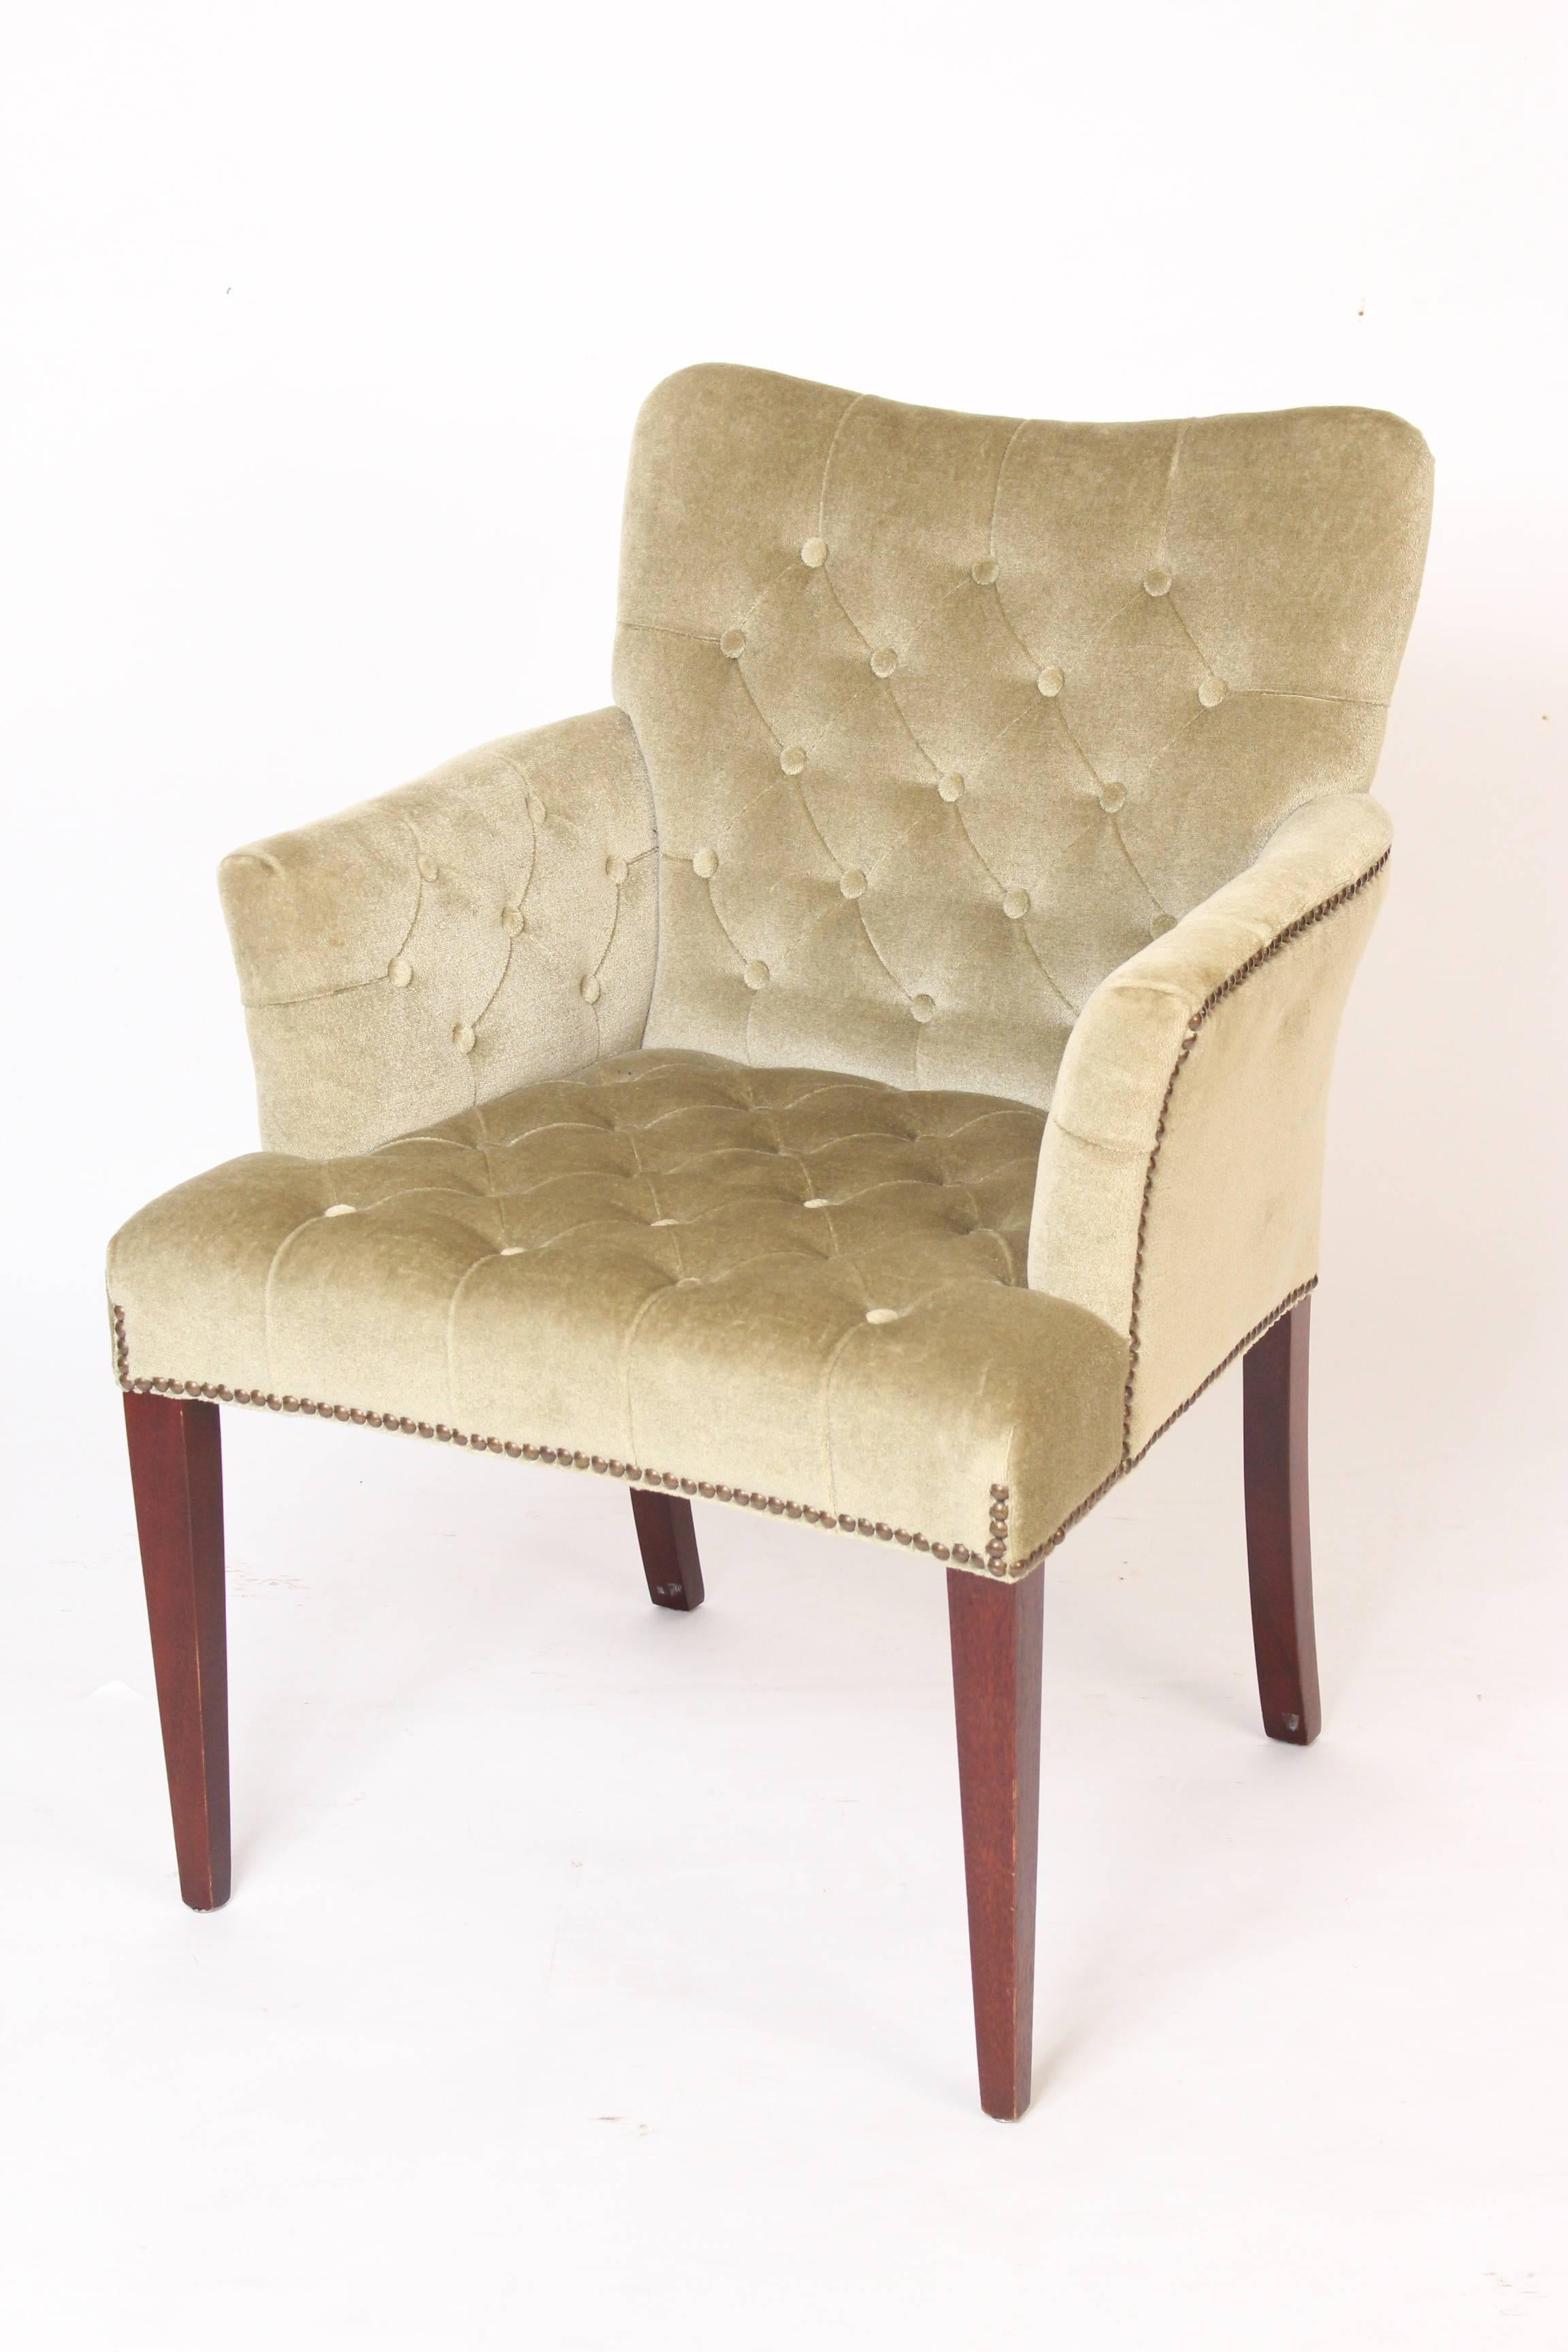 Pair of Mid-Century Modern style bergeres with button and tuck upholstery, brass nailhead trim and mahogany legs, late 20th century.